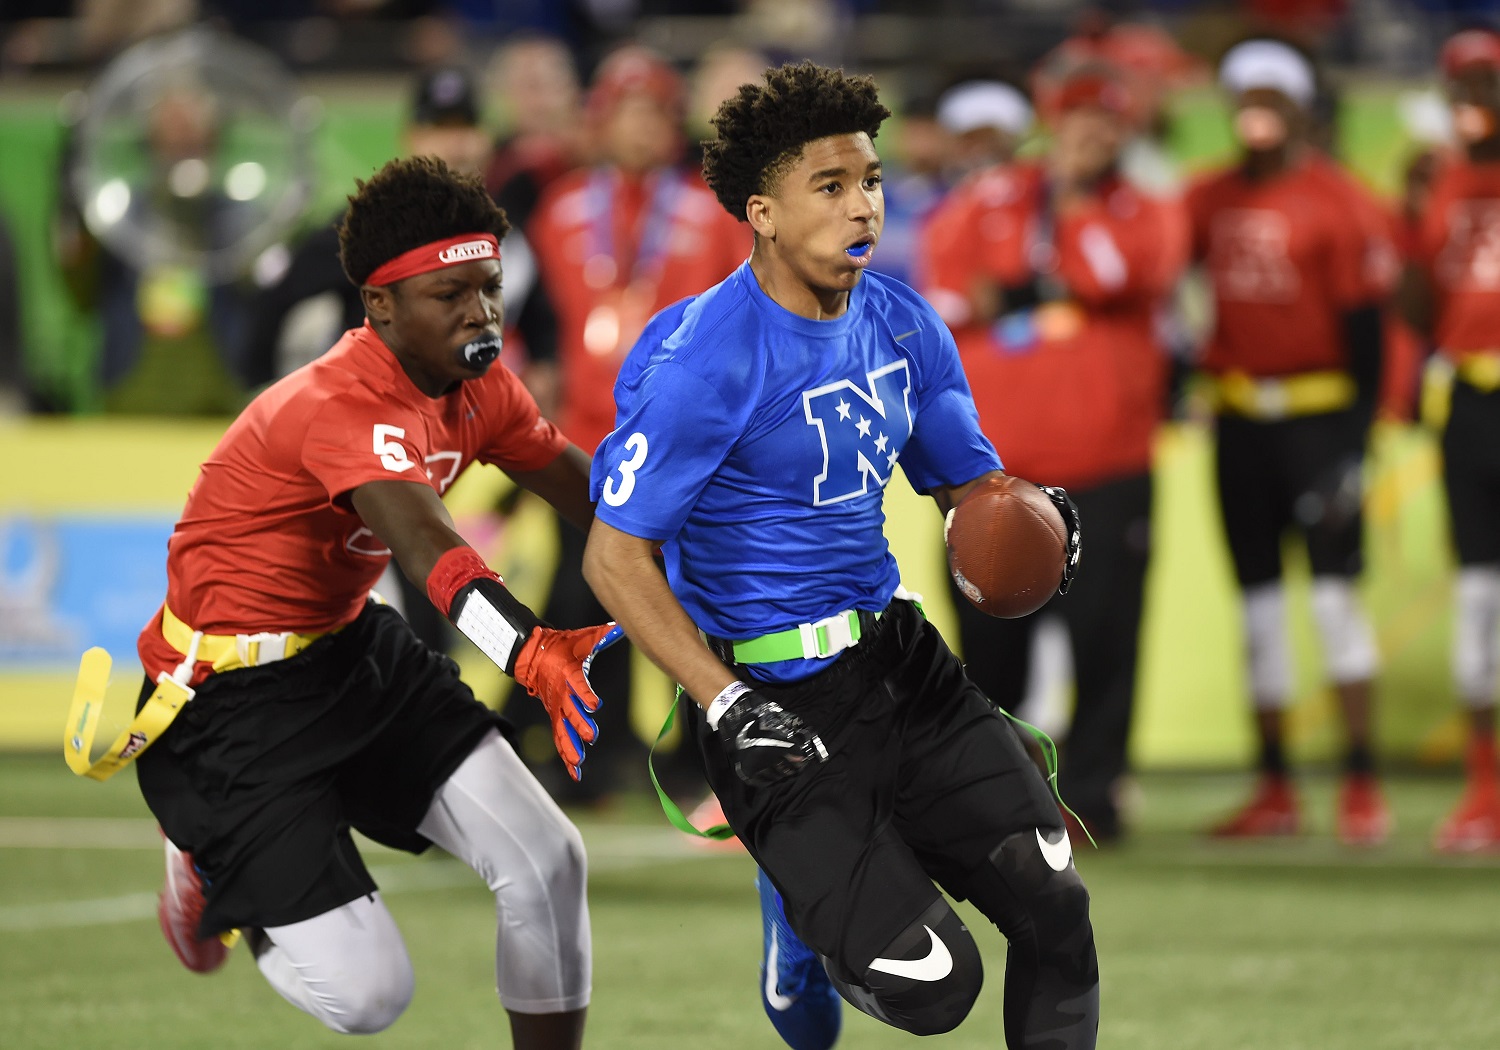 Youth Flag Football Teams Compete at 2019 Pro Bowl   NFL Football Operations